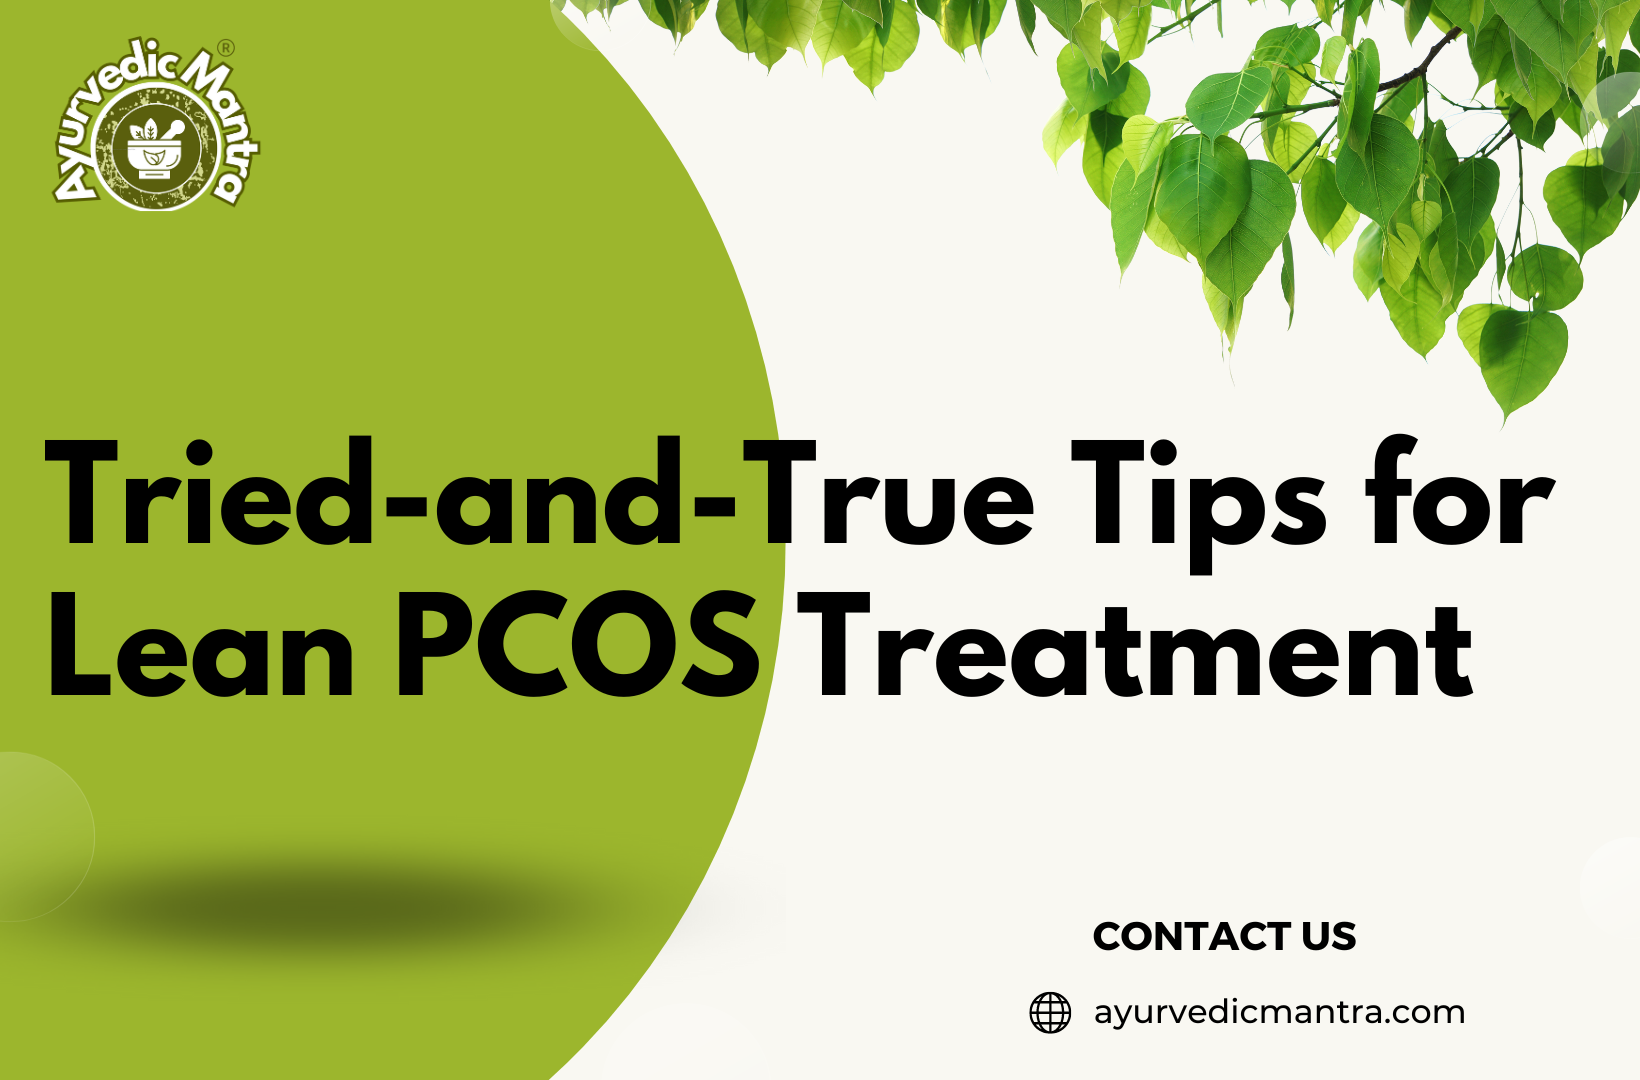 Tried-and-True Tips for Lean PCOS Treatment